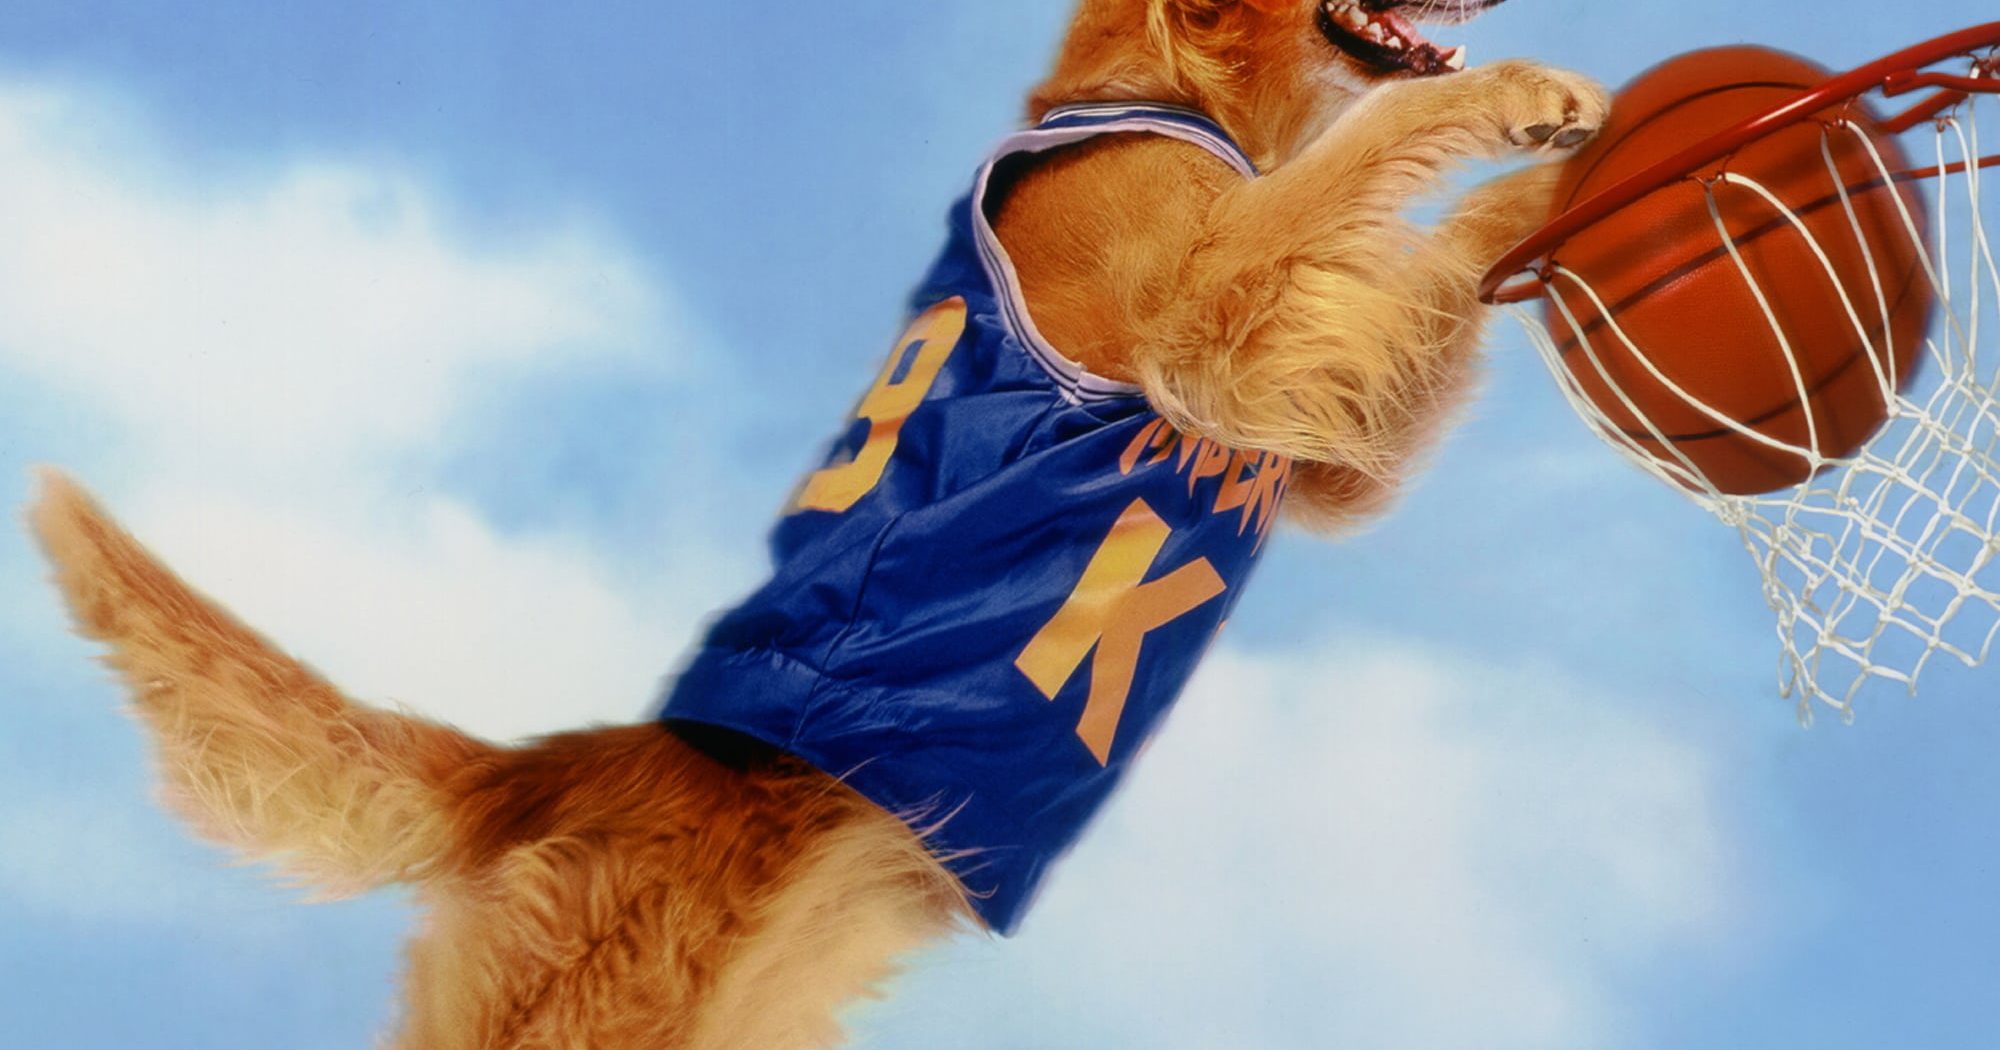 Poster for the movie "Air Bud"